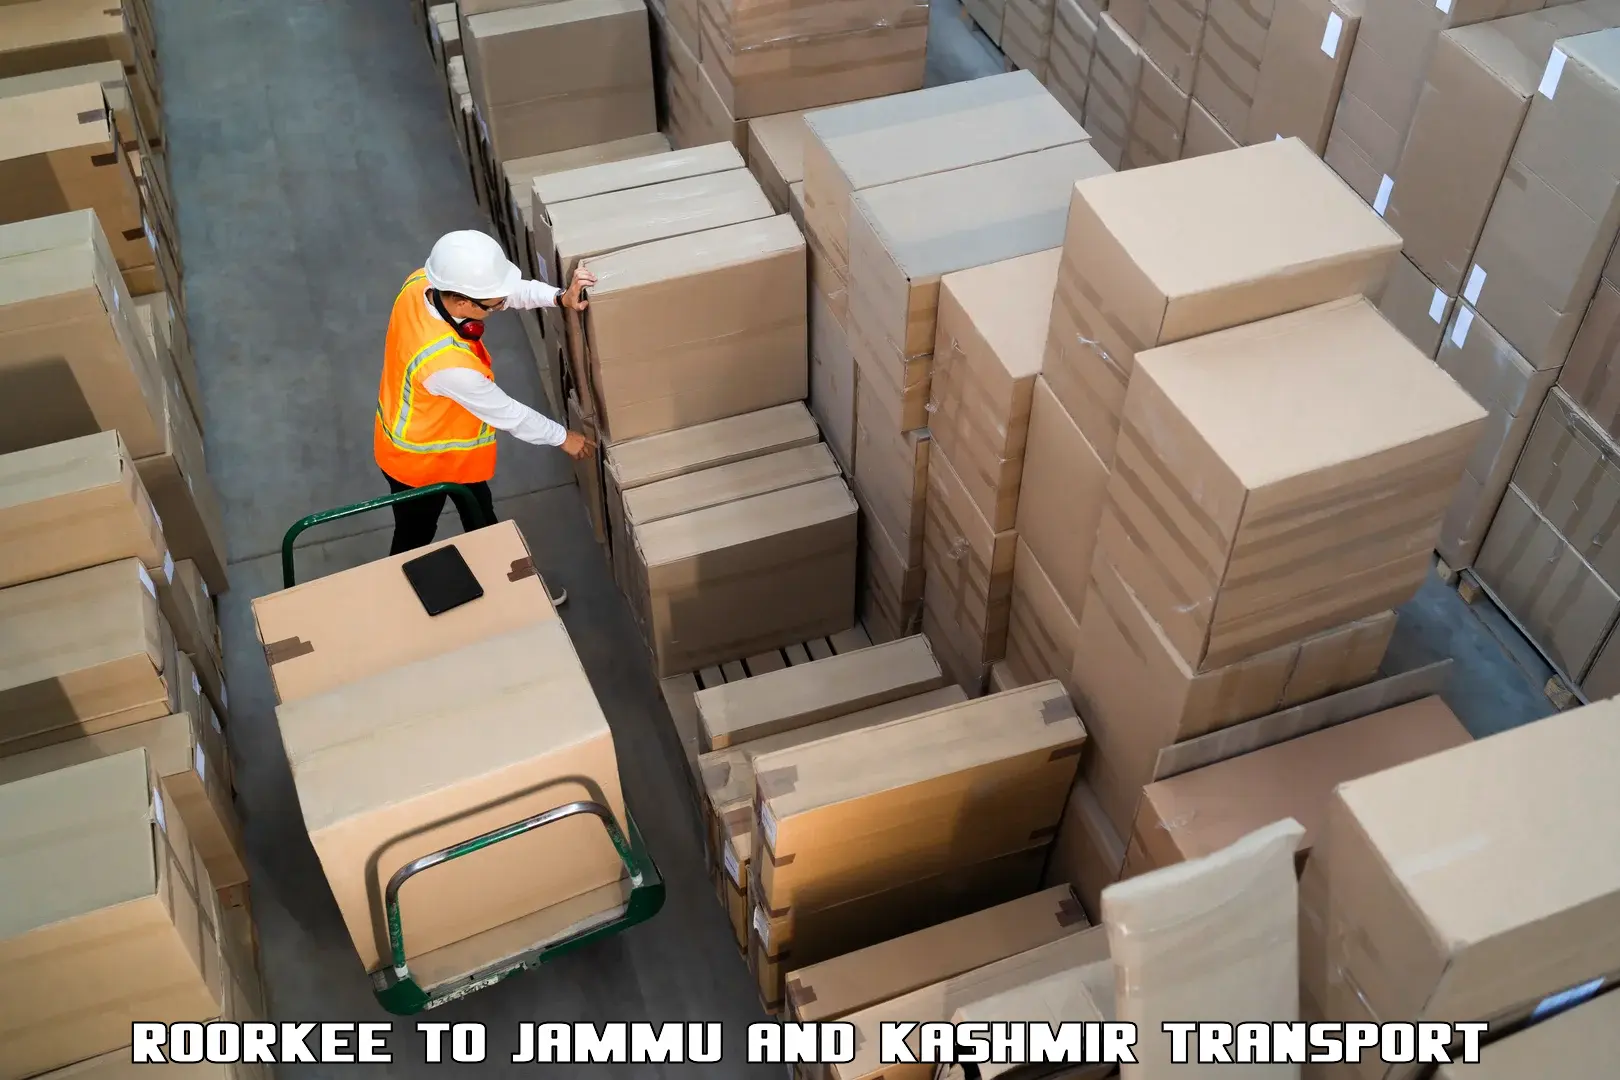 Pick up transport service Roorkee to Jammu and Kashmir